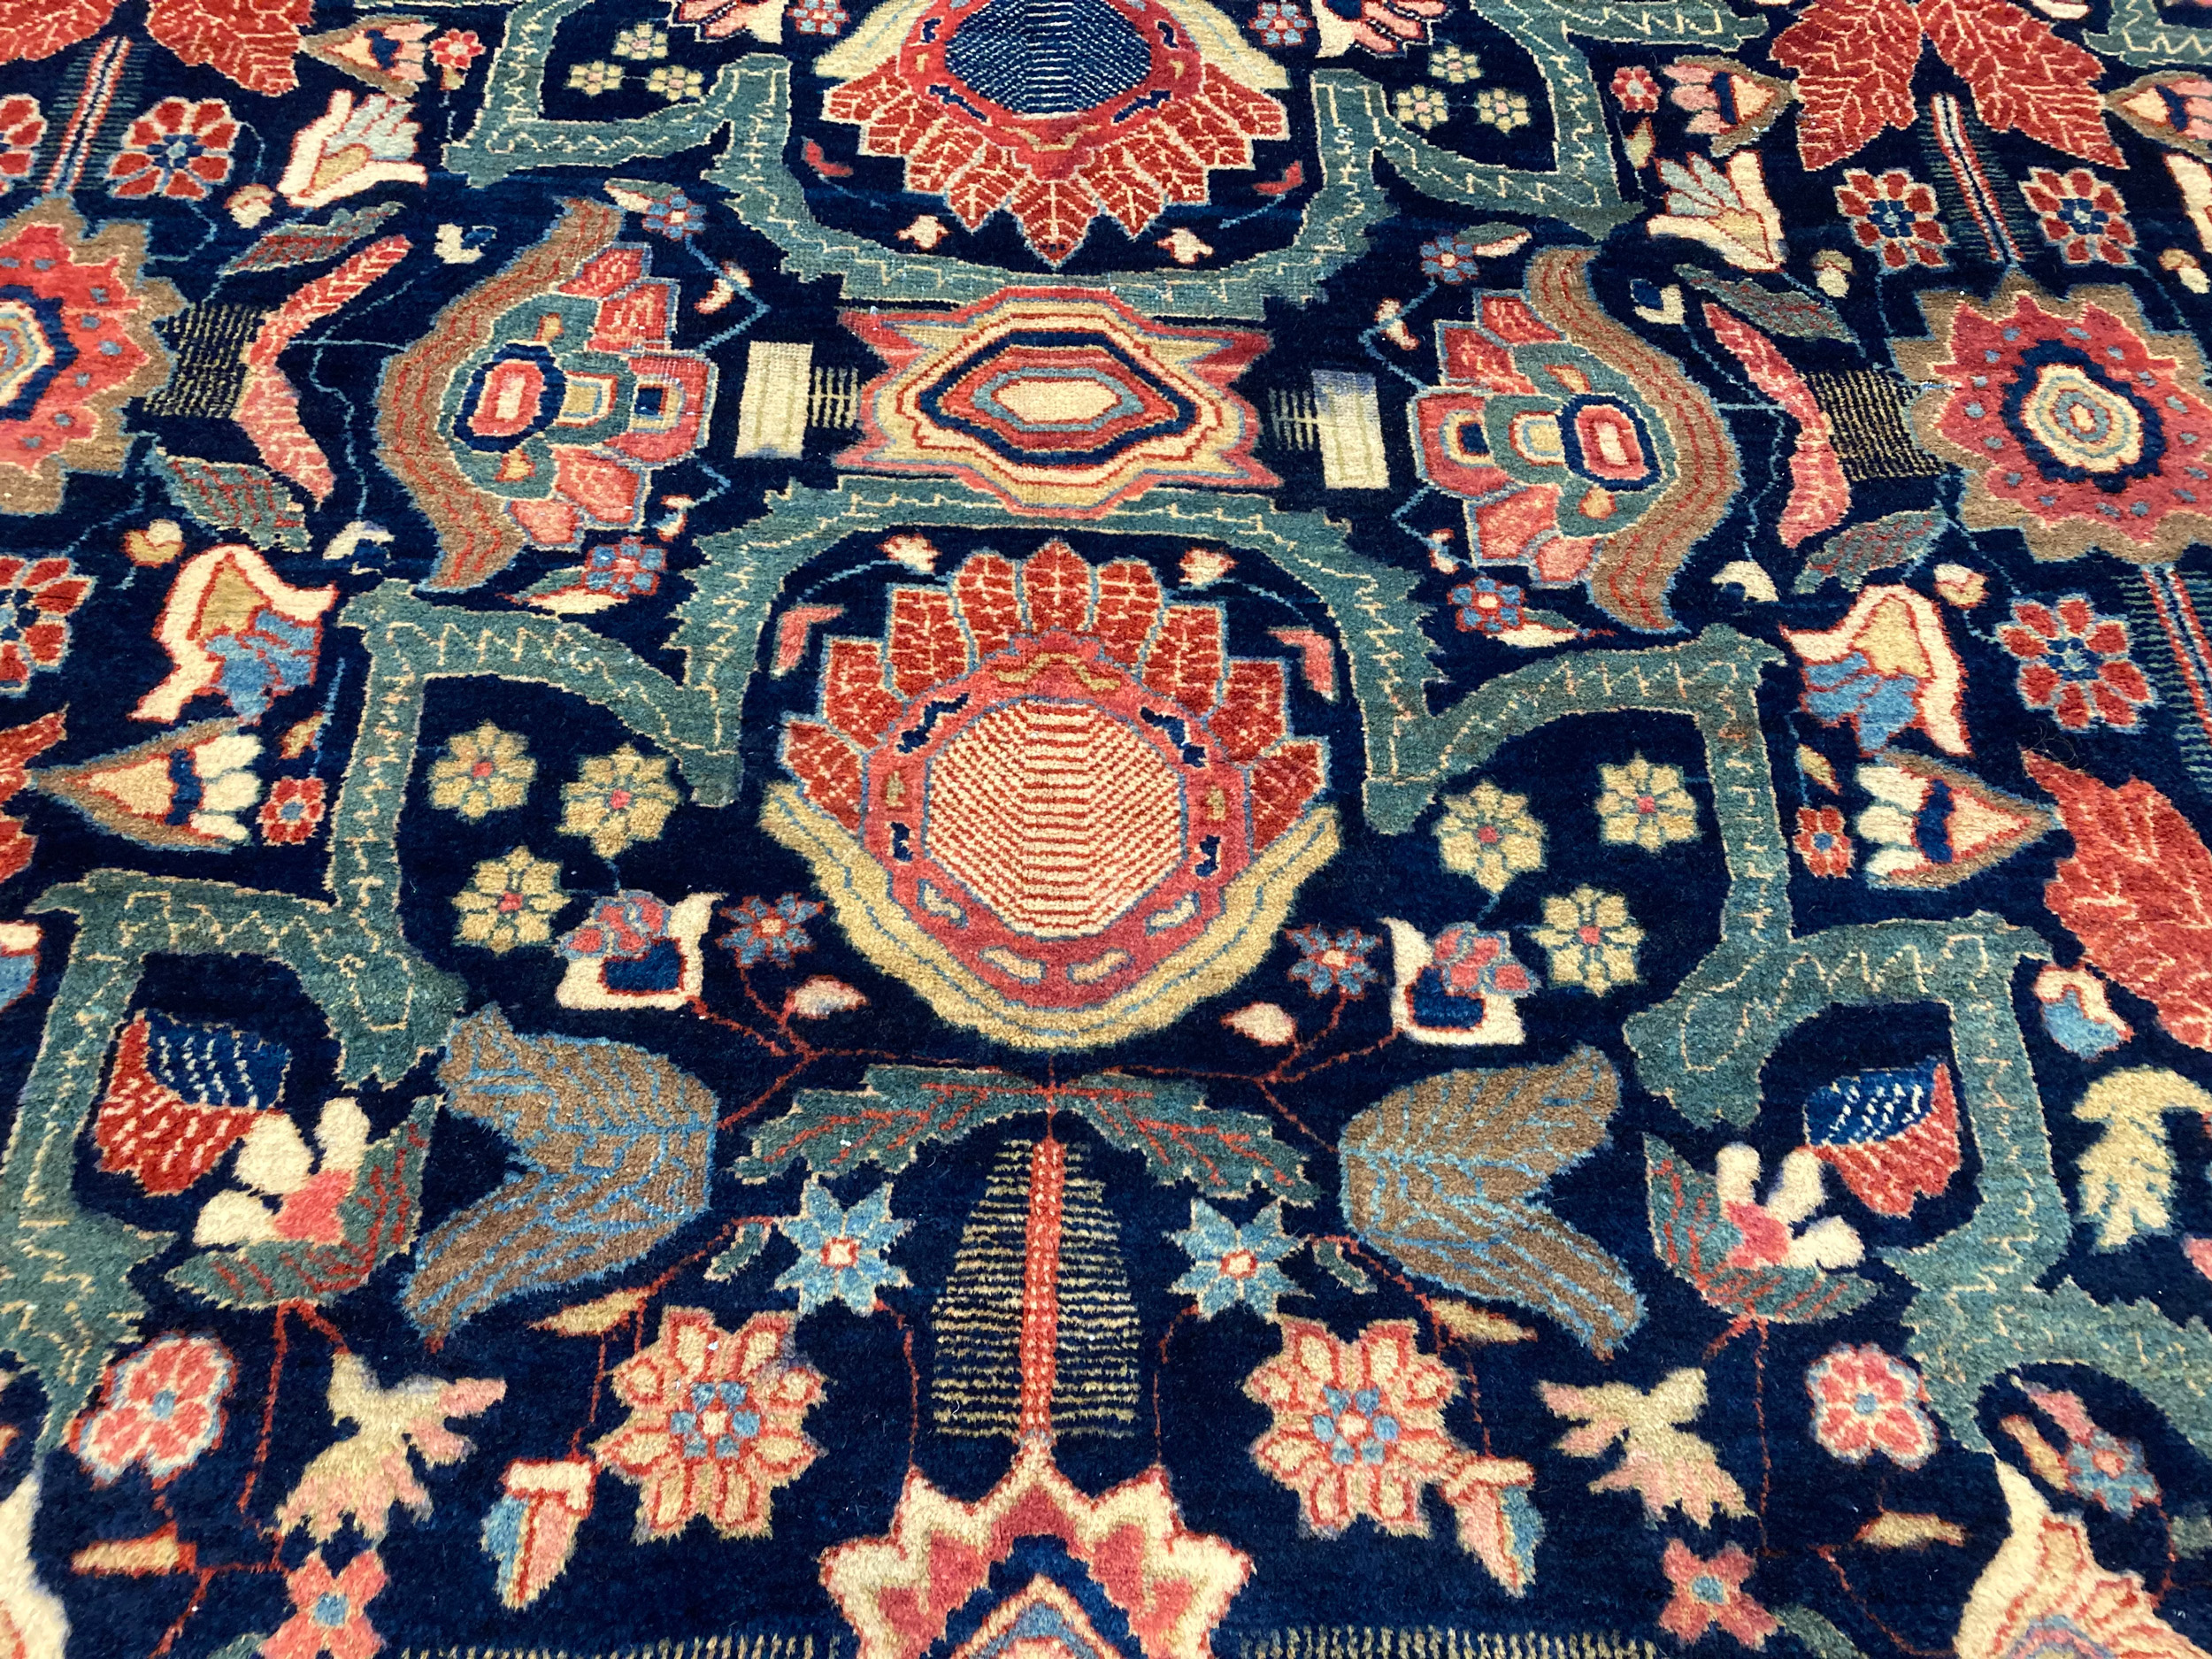 Field detail of an antique Persian Fereghan Sarouk carpet with flowers and strapwork on a navy field